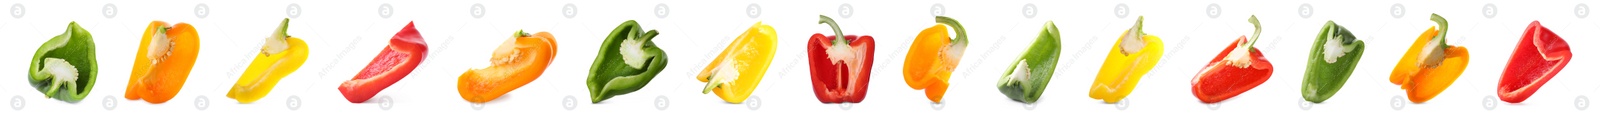 Image of Set of different cut bell peppers on white background. Banner design 